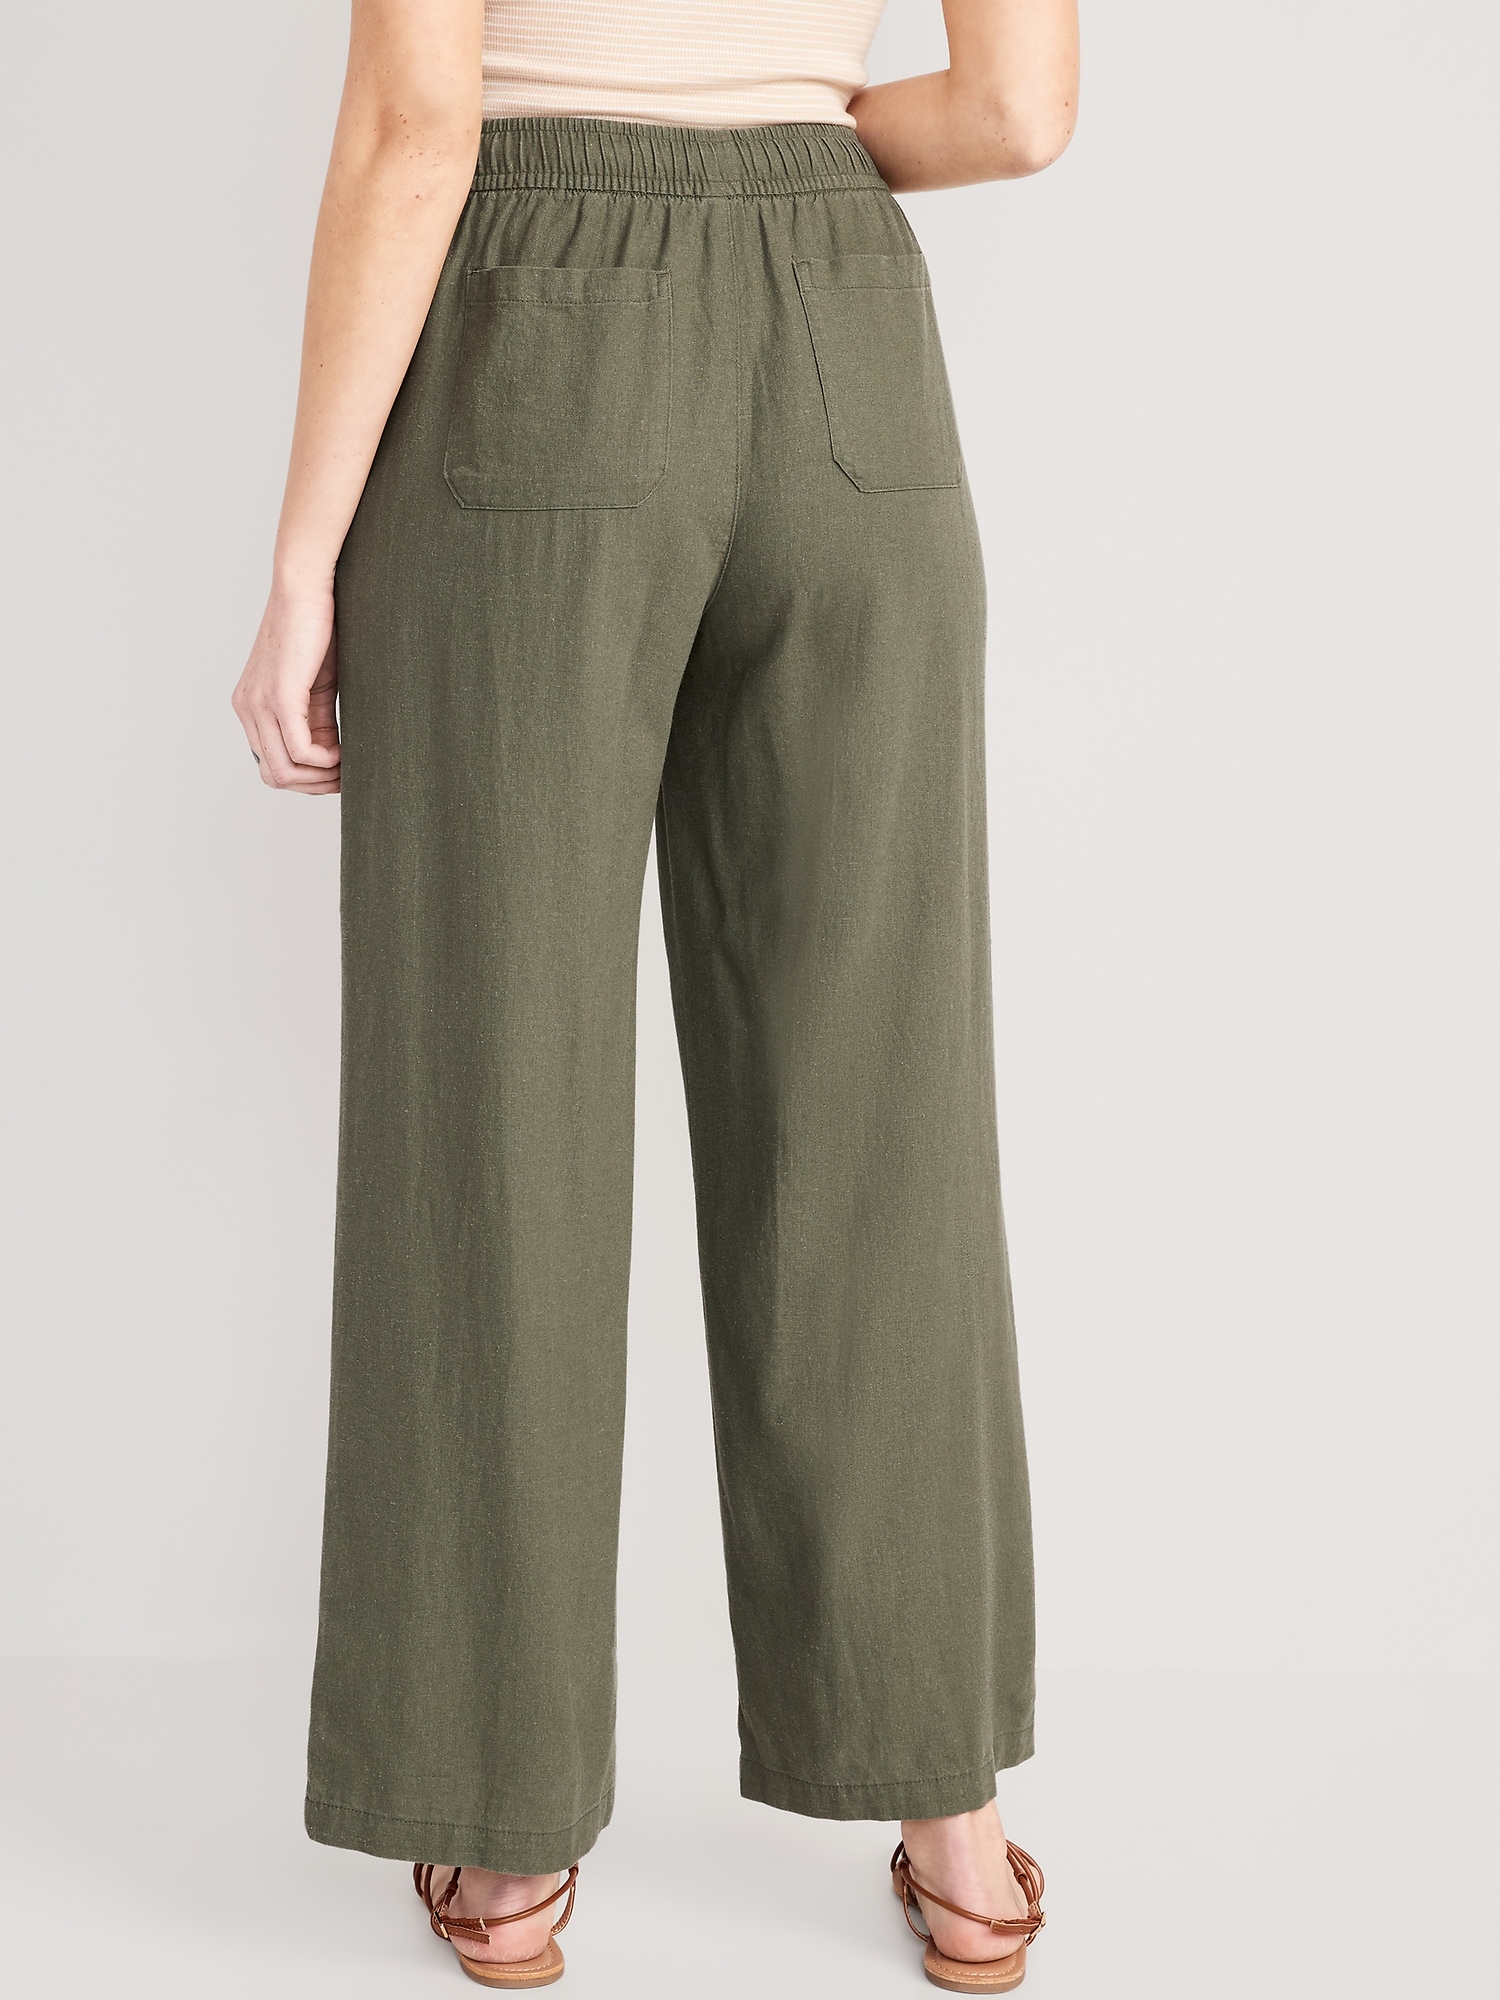 High-Waisted Playa Wide-Leg Pants for Women, Old Navy